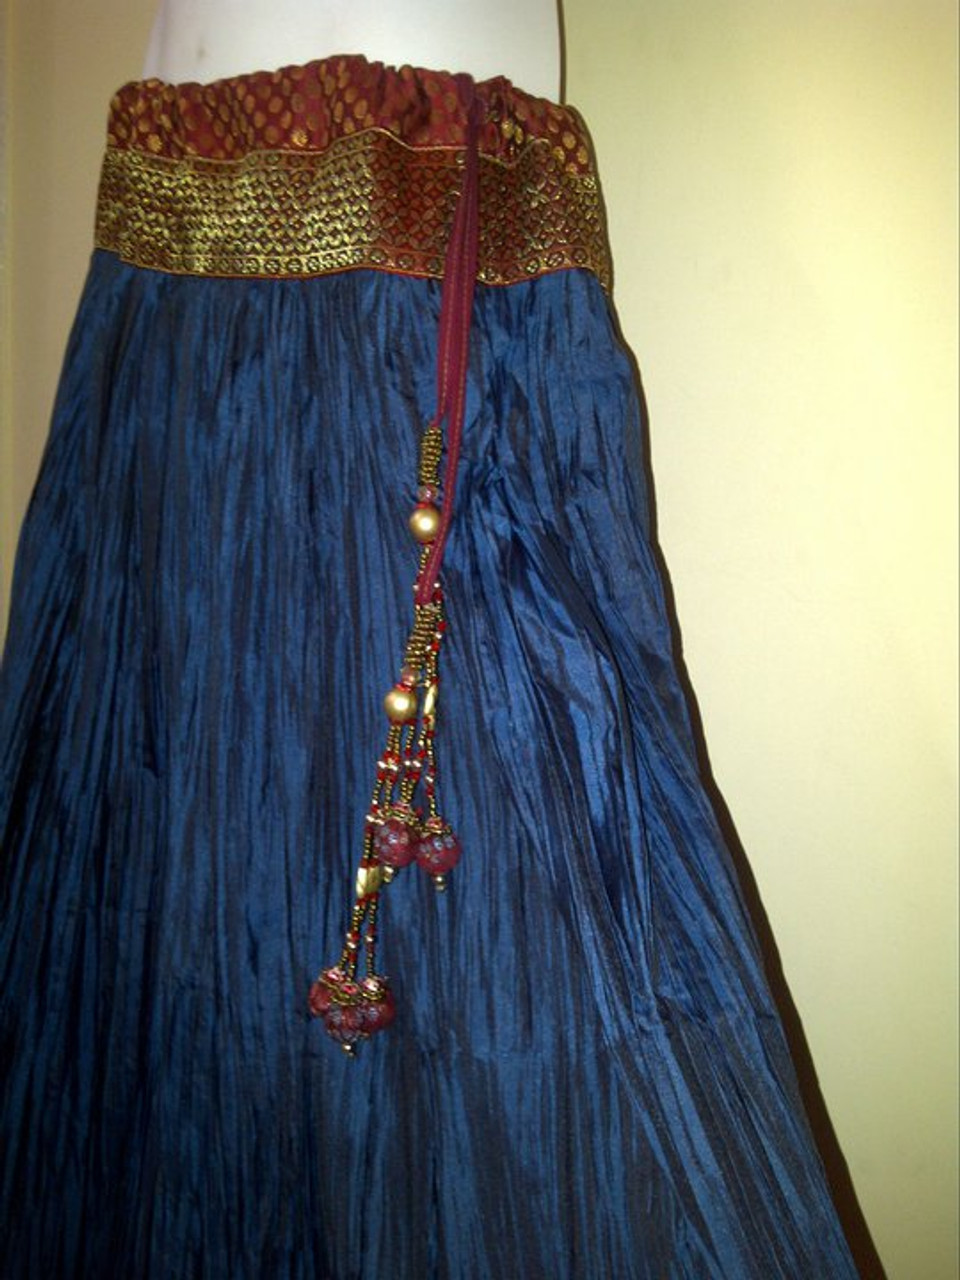 Gorgeous Midnight Blue Crushed Silk Skirt - Magical Fashions